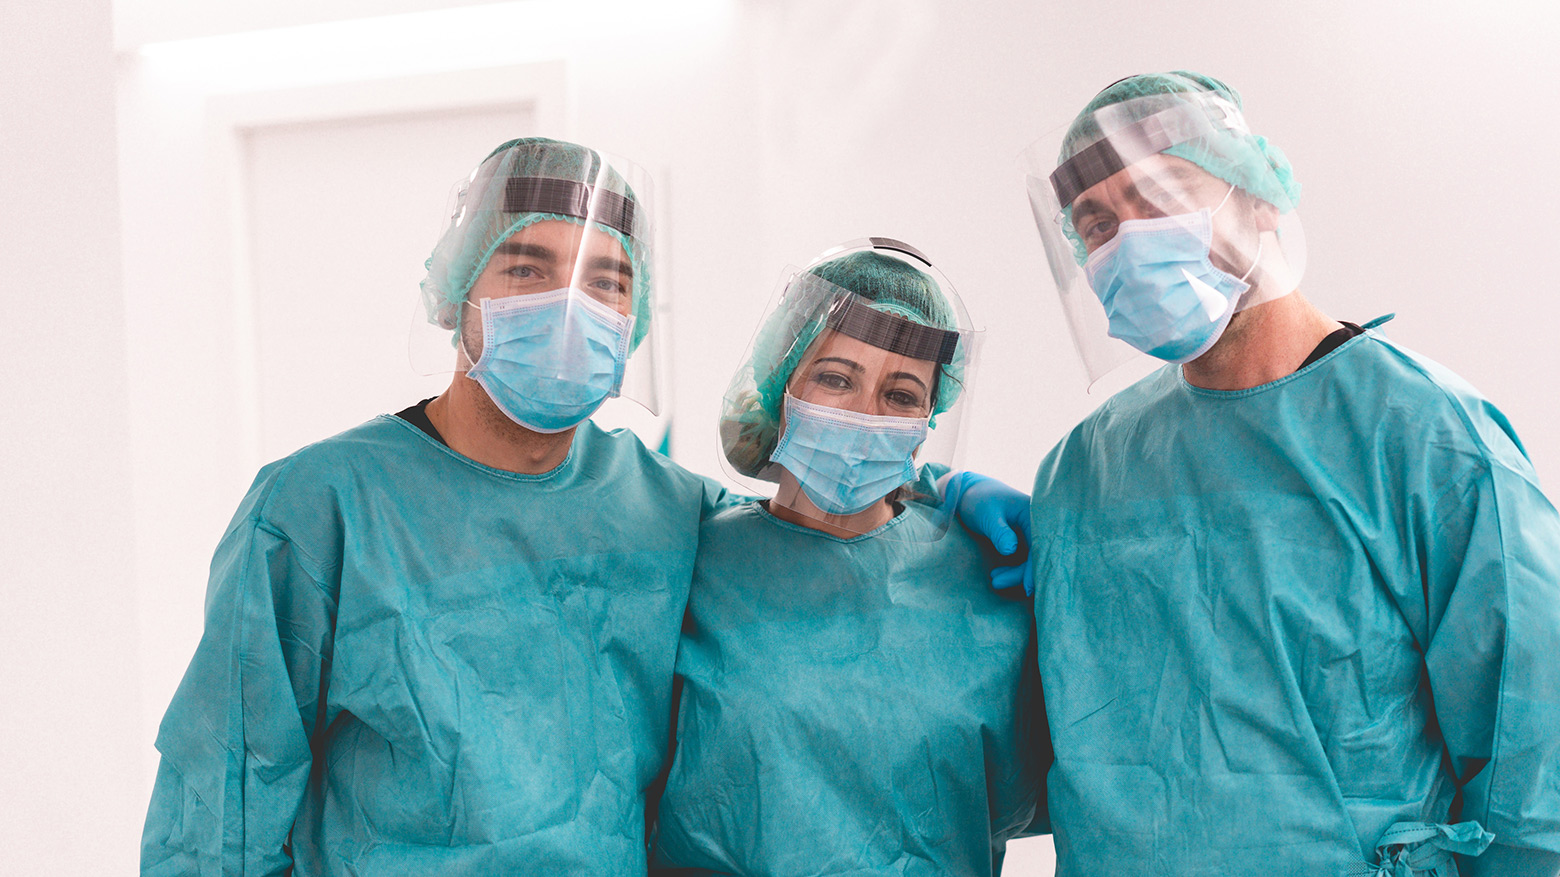 Three health-care workers standing side-by-side in full personal protective equipment (masks, face shields and gowns) 